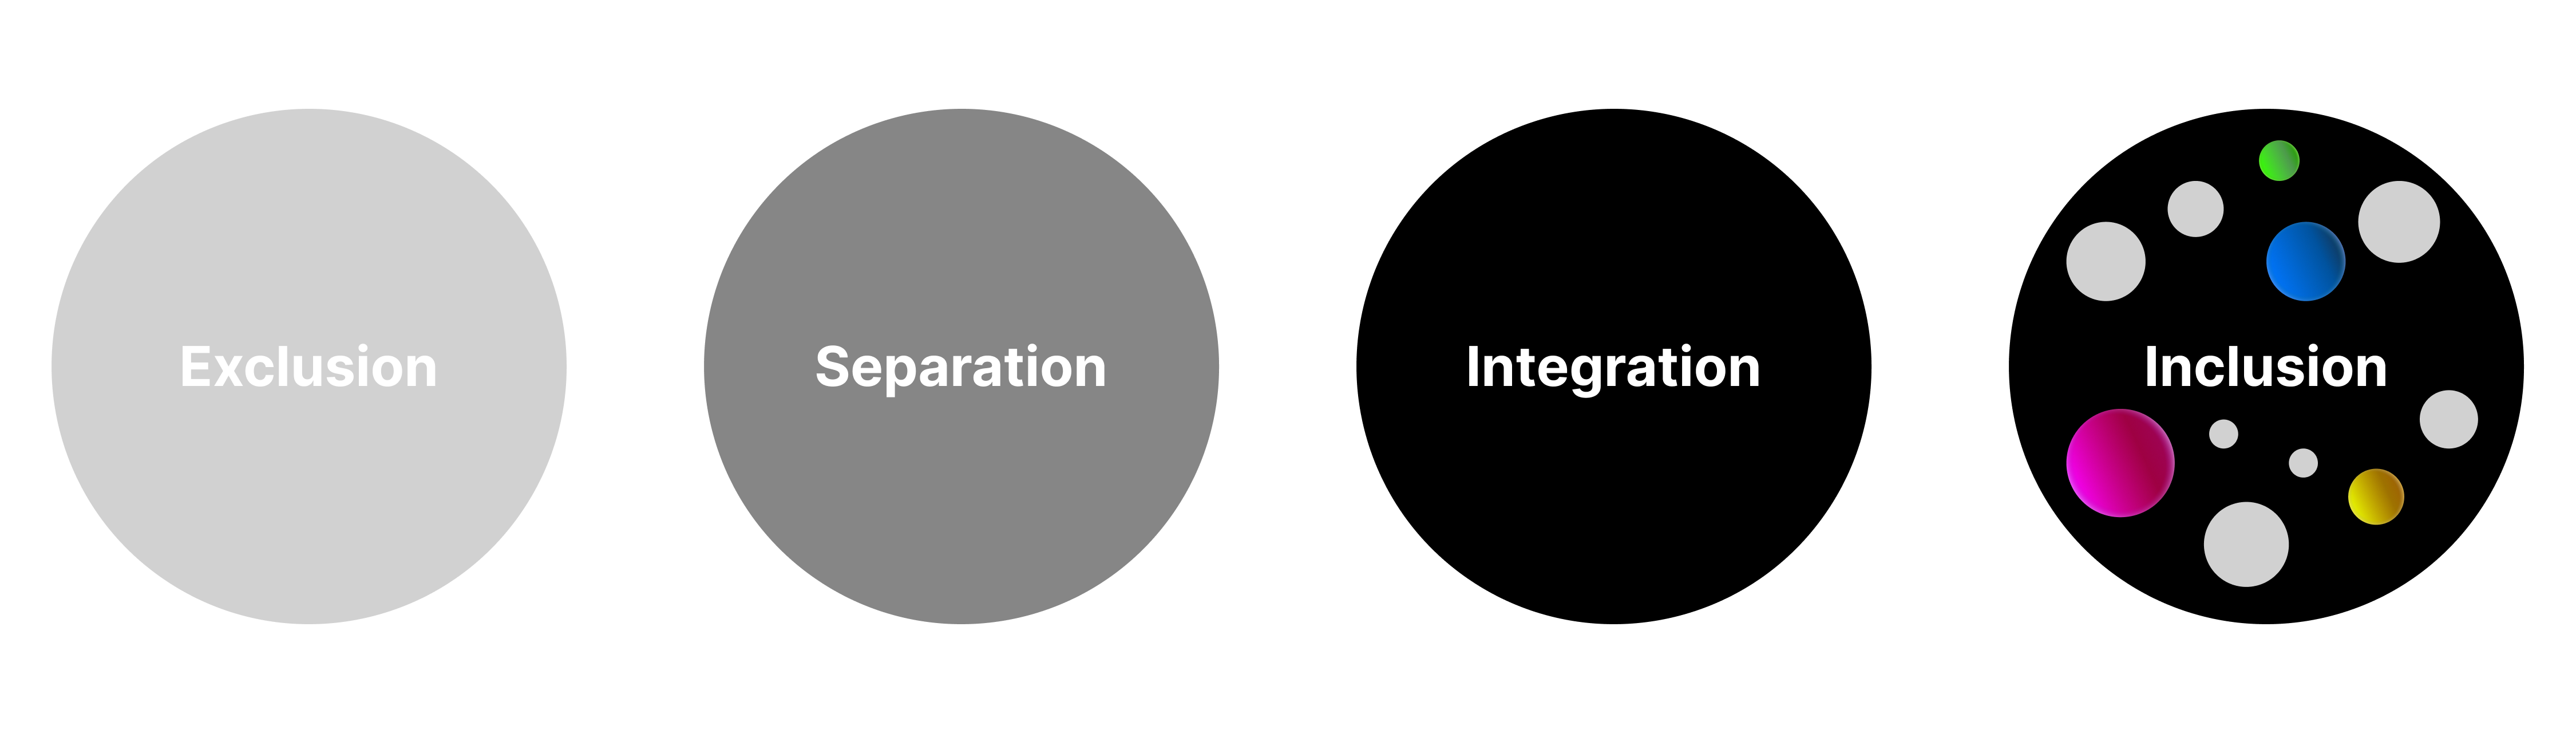 The image depicts four circles highlighting four levels of inclusion. The first one, in light gray, represents exclusion. The second one, in dark gray, represents separation. The third one, in black, represents integration. The fourth one, in black with small gray and coloured spheres, represents inclusion.